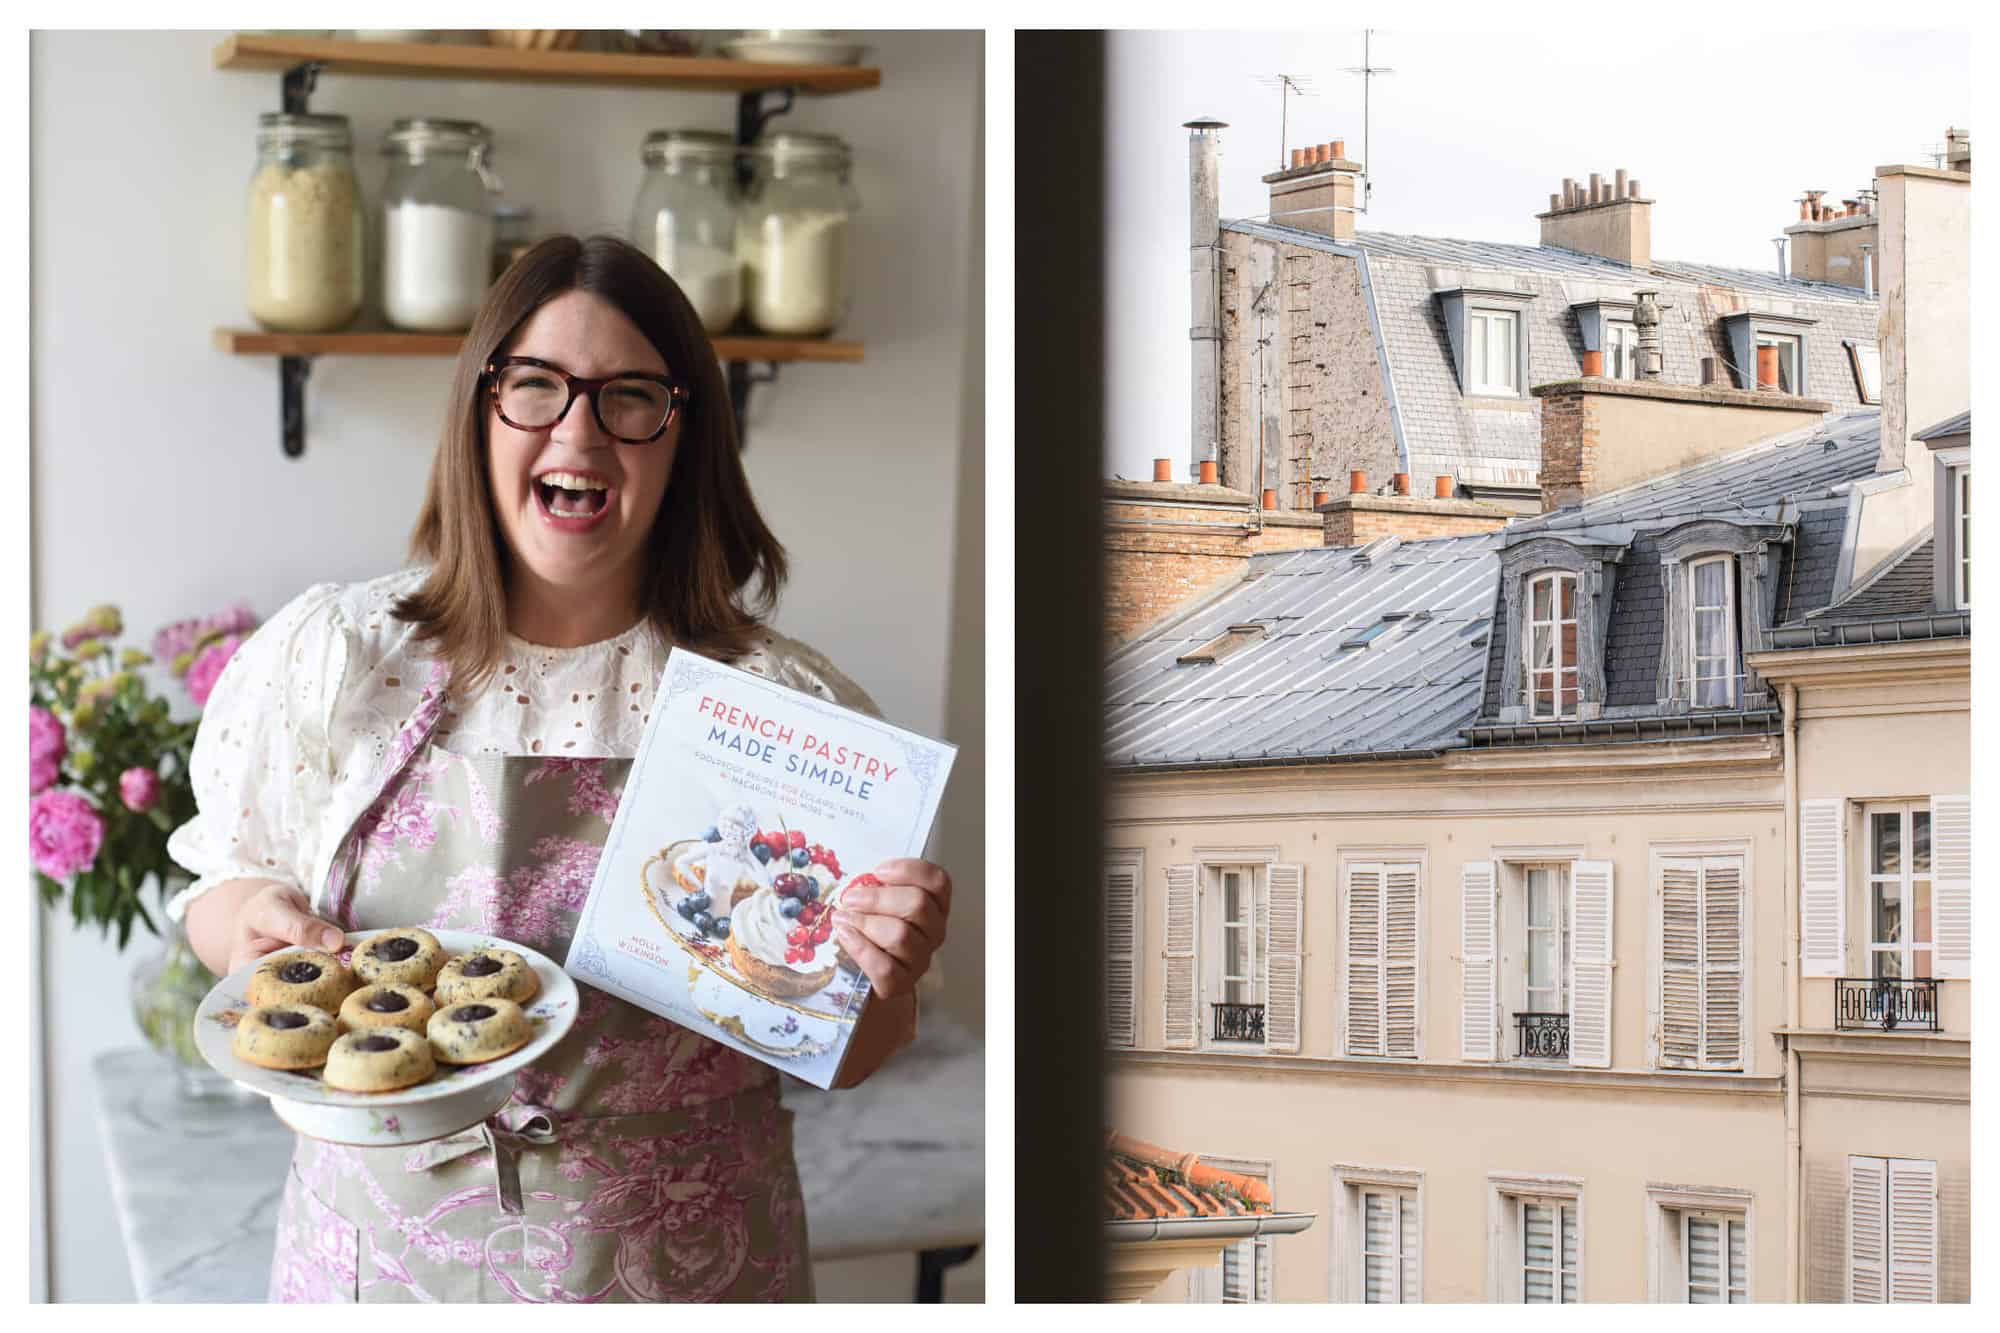 Left: Chef Molly Wilkinson is smiling brightly and poses with her new book French Pastry Made Simple. Right: The view from the window of Chef Molly Wilkinson . It is a view of Parisian building with windows and beige colored walls